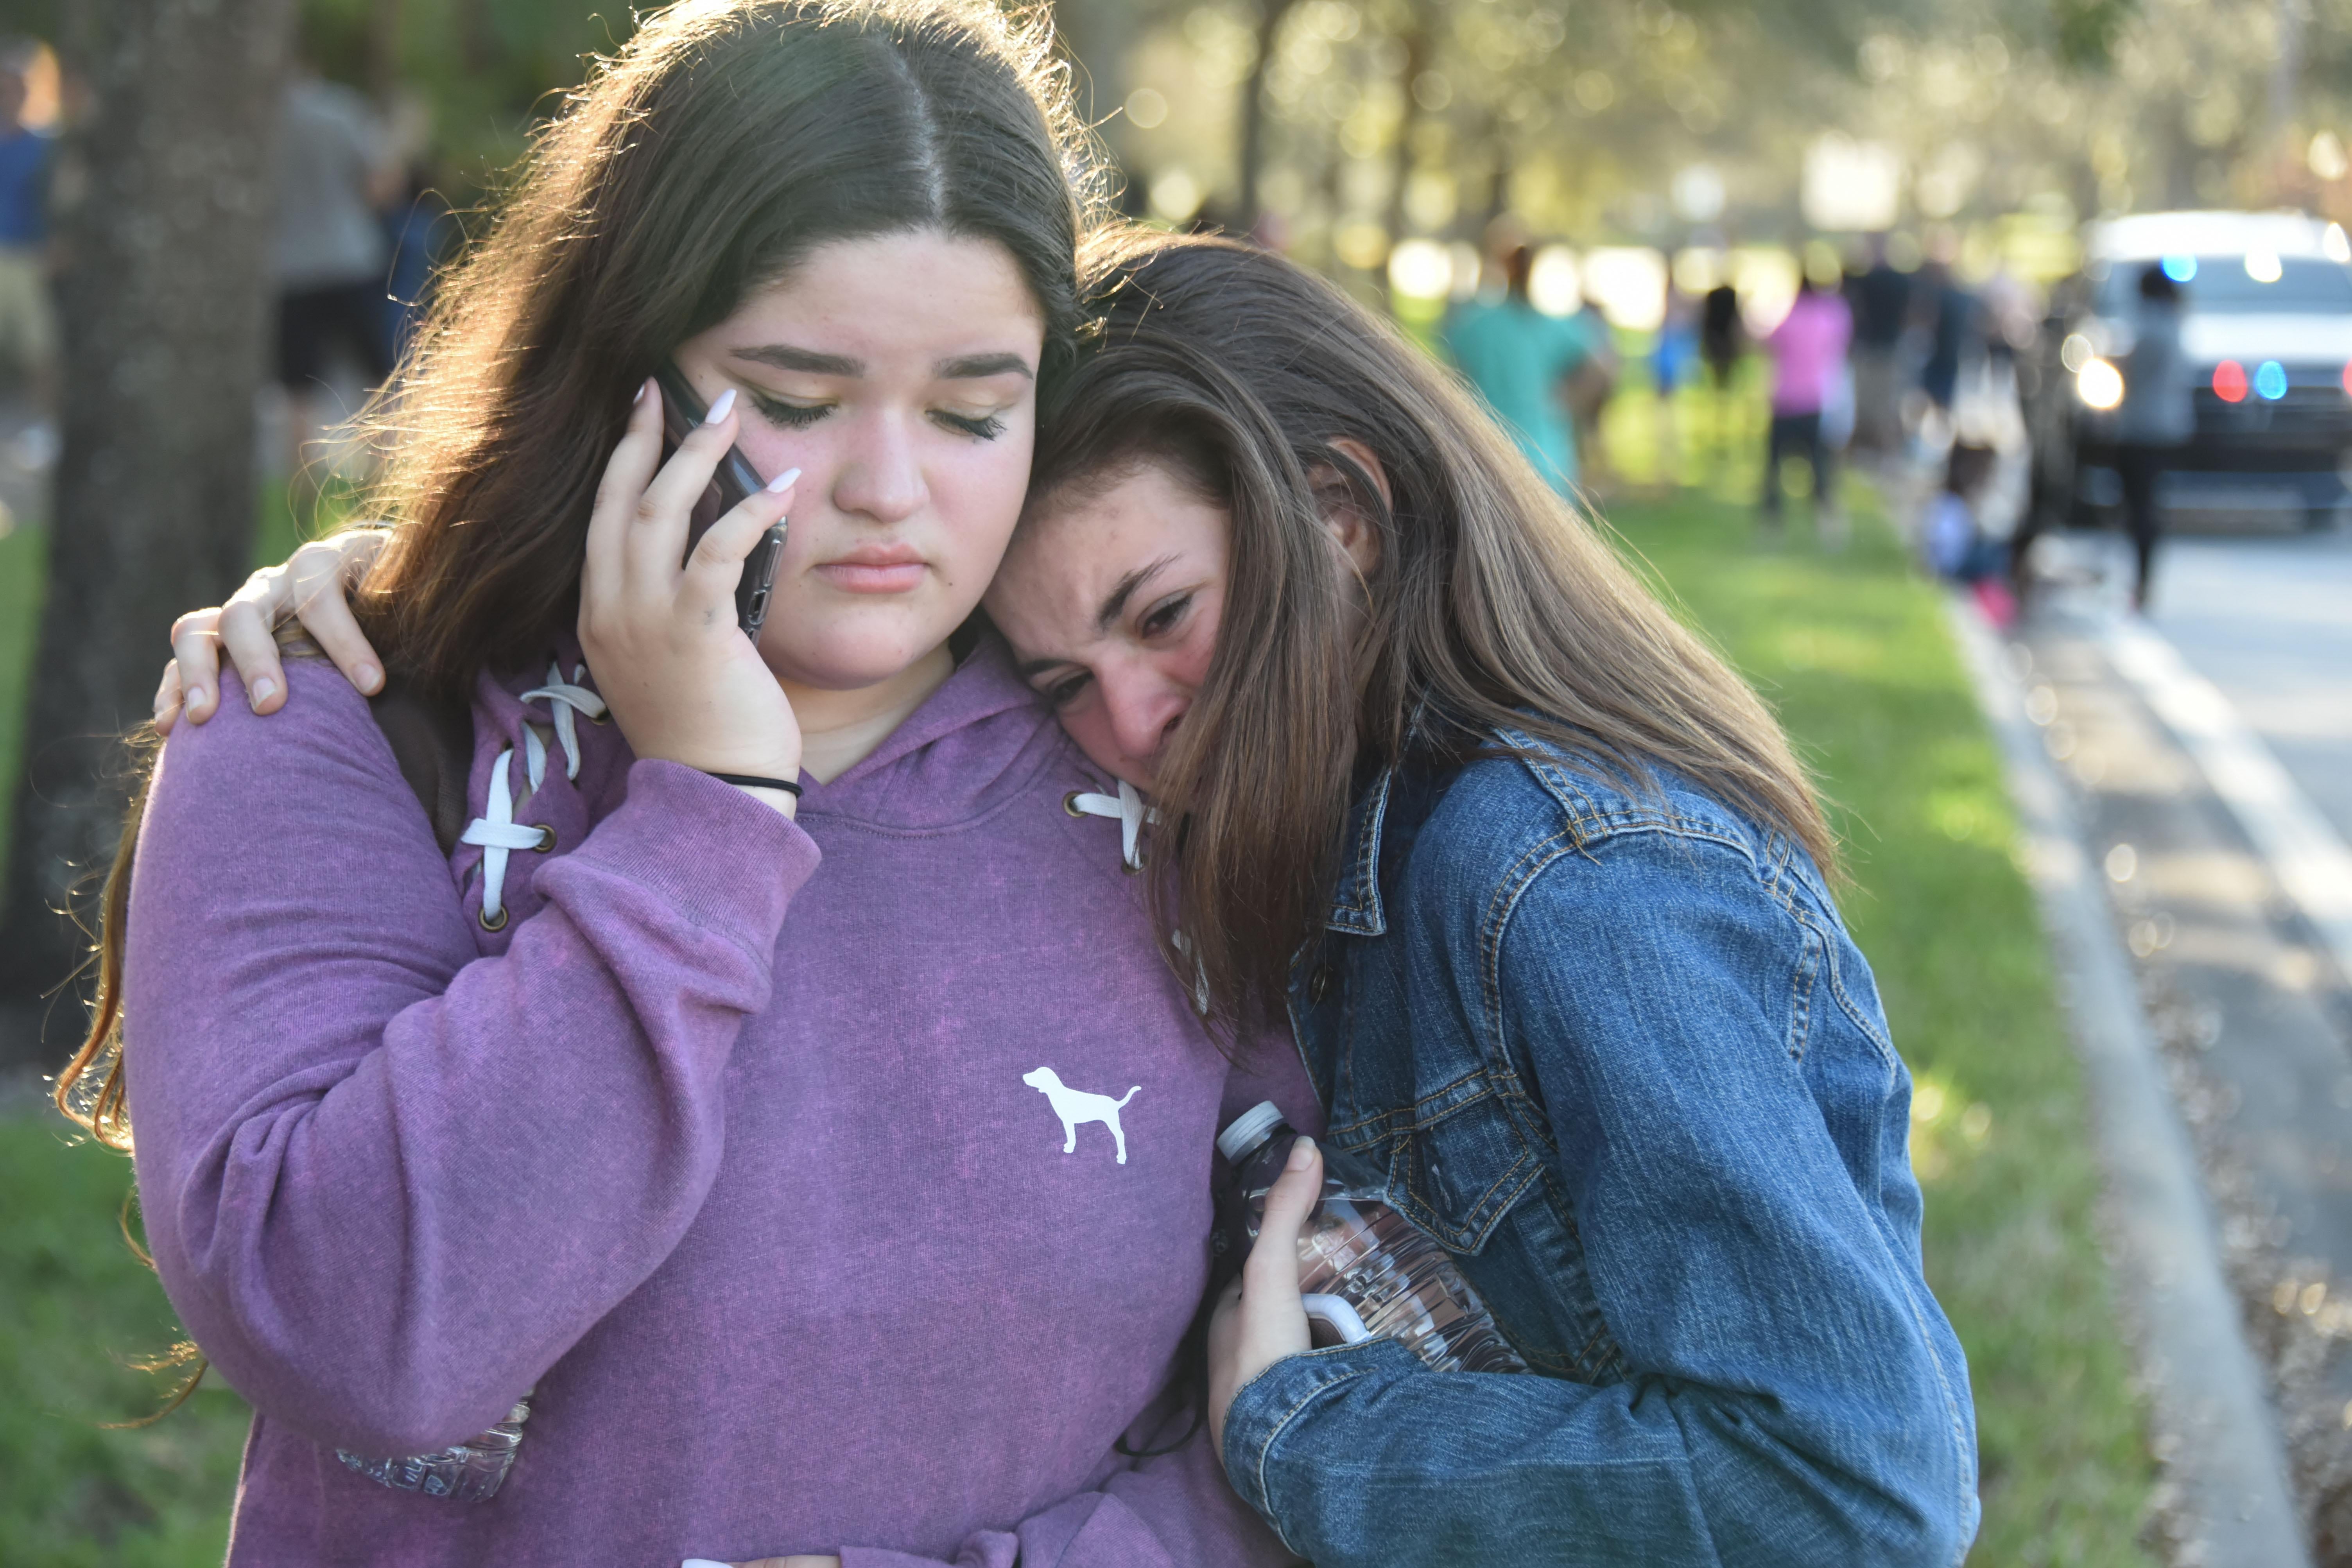 Students react following a shooting at Marjory Stoneman Douglas High School in Parkland, Florida, a city about 50 miles (80 kilometers) north of Miami on February 14, 2018.
A gunman opened fire at the Florida high school, an incident that officials said caused 'numerous fatalities' and left terrified students huddled in their classrooms, texting friends and family for help.
The Broward County Sheriff's Office said a suspect was in custody. / AFP PHOTO / Michele Eve Sandberg        (Photo credit should read MICHELE EVE SANDBERG/AFP/Getty Images)